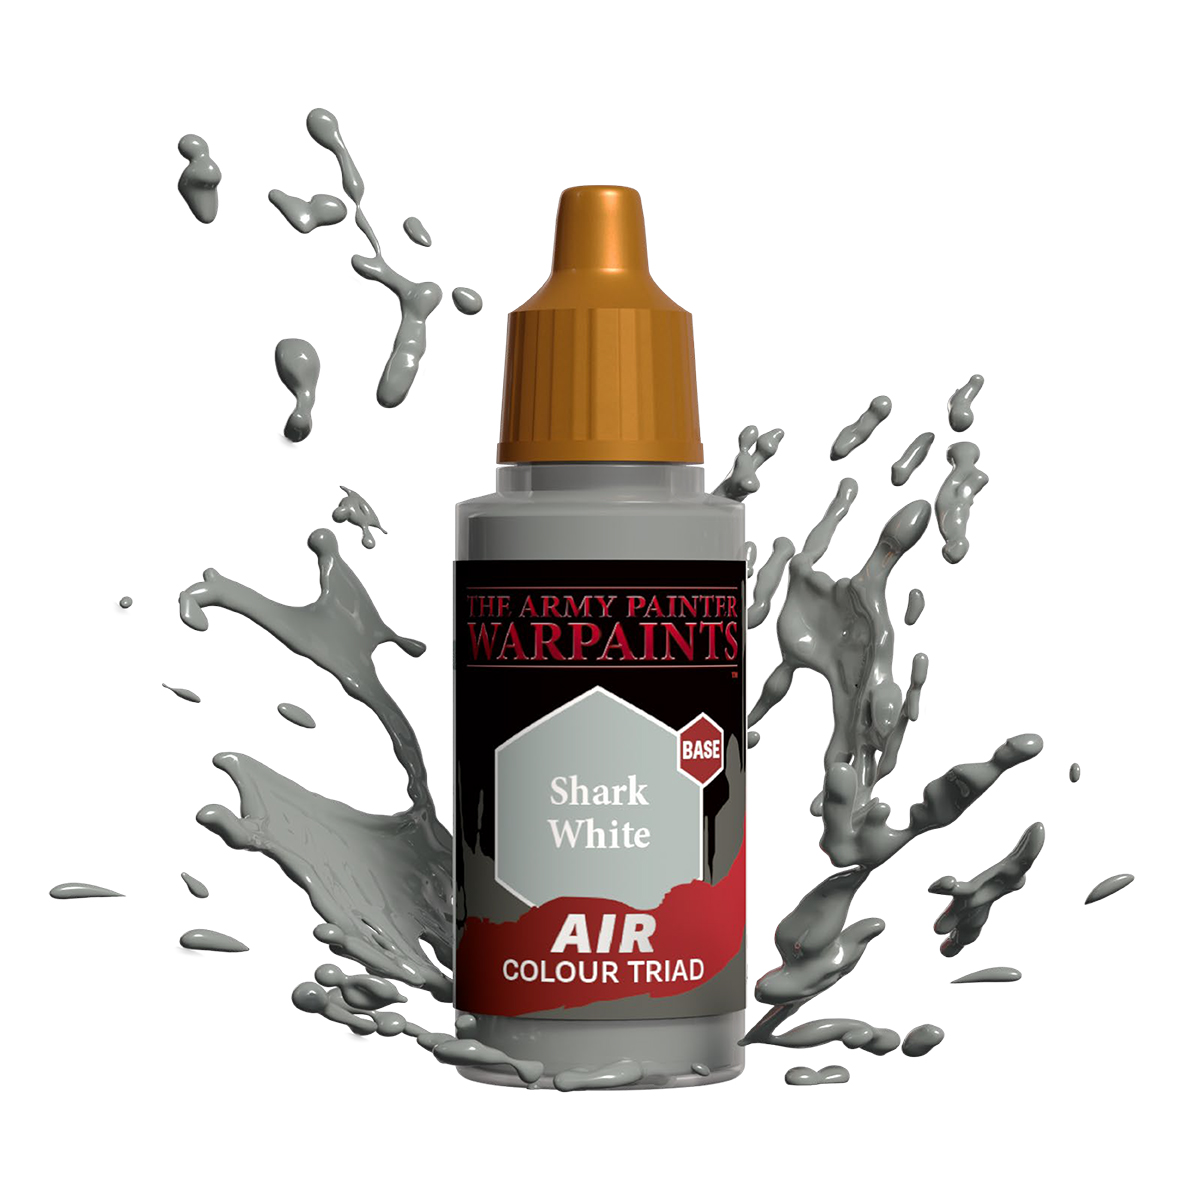 The Army Painter: Warpaints Air - Shark White